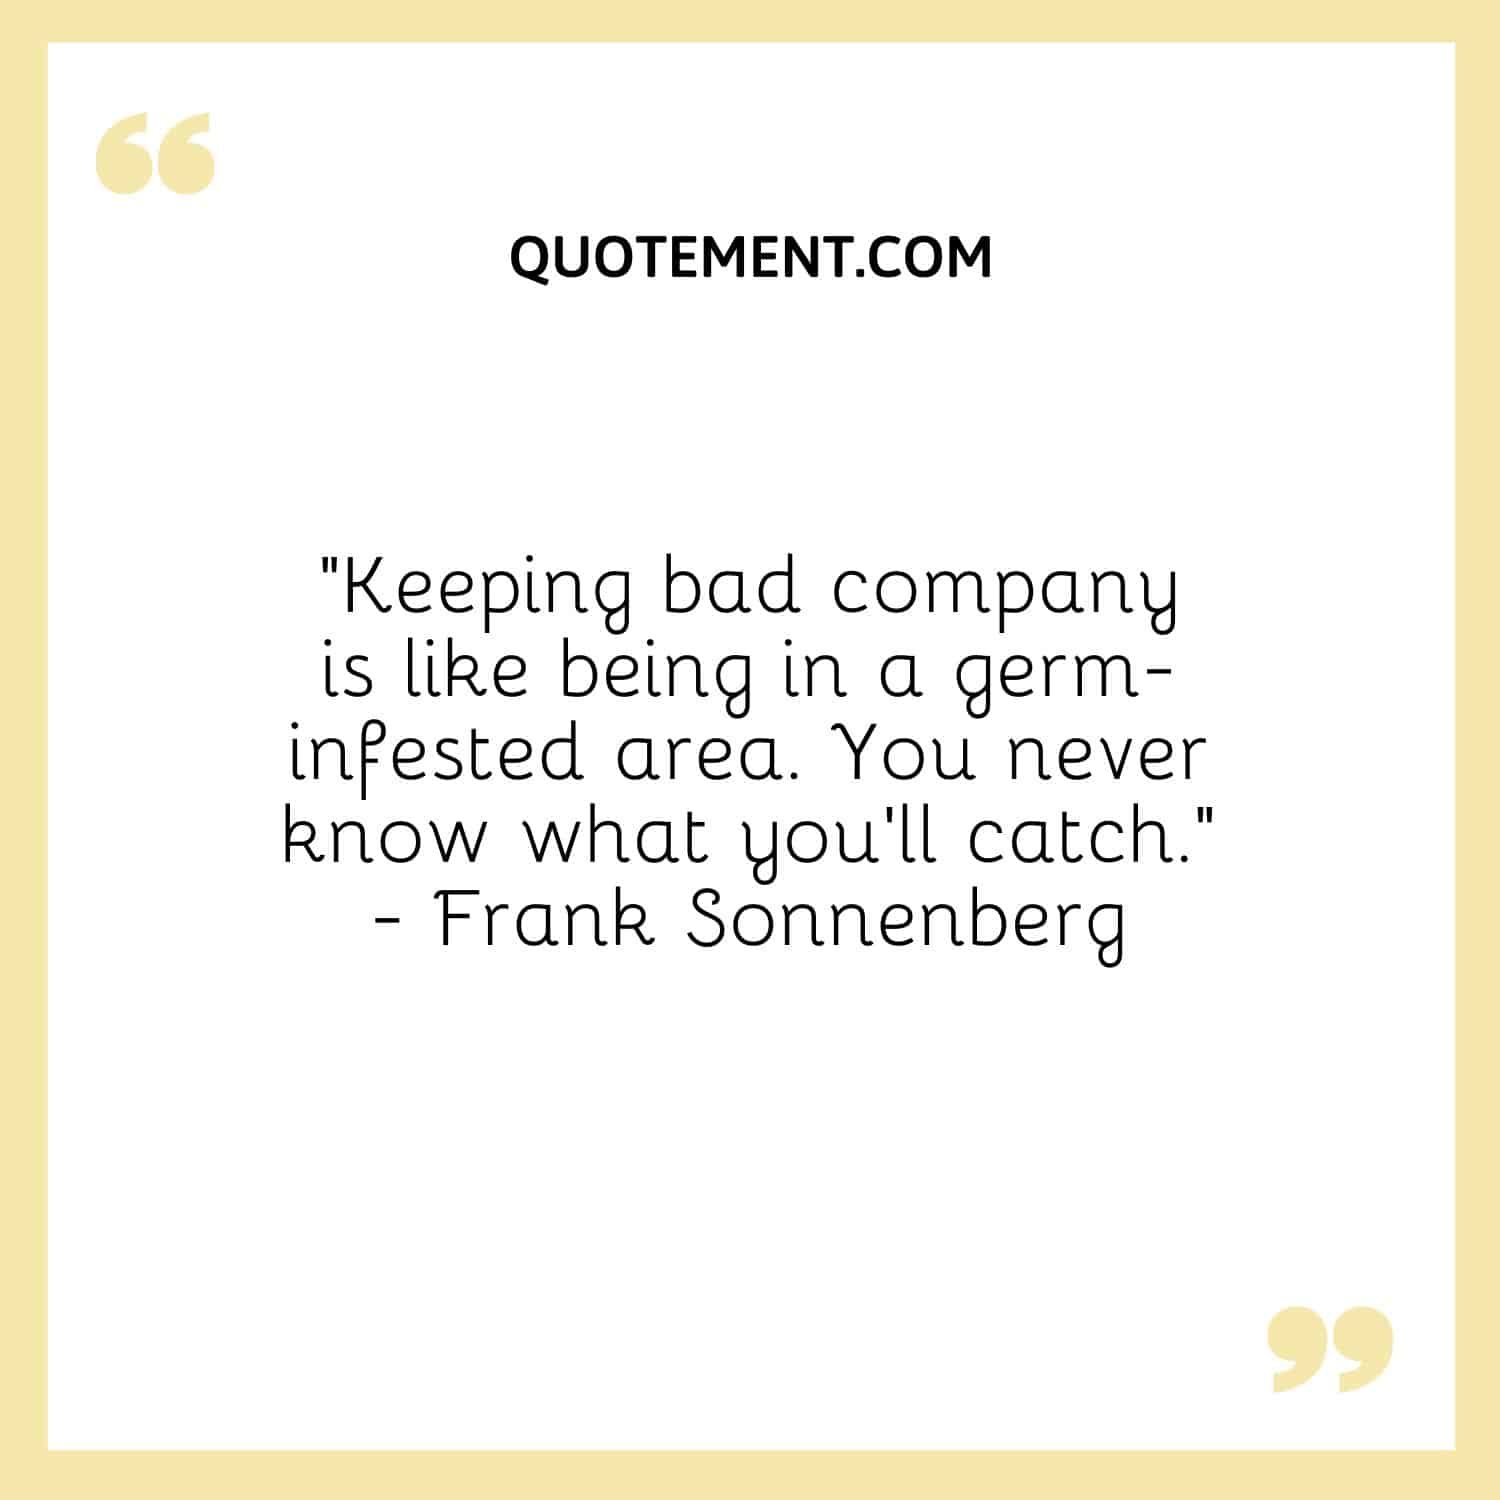 “Keeping bad company is like being in a germ-infested area. You never know what you’ll catch.” - Frank Sonnenberg